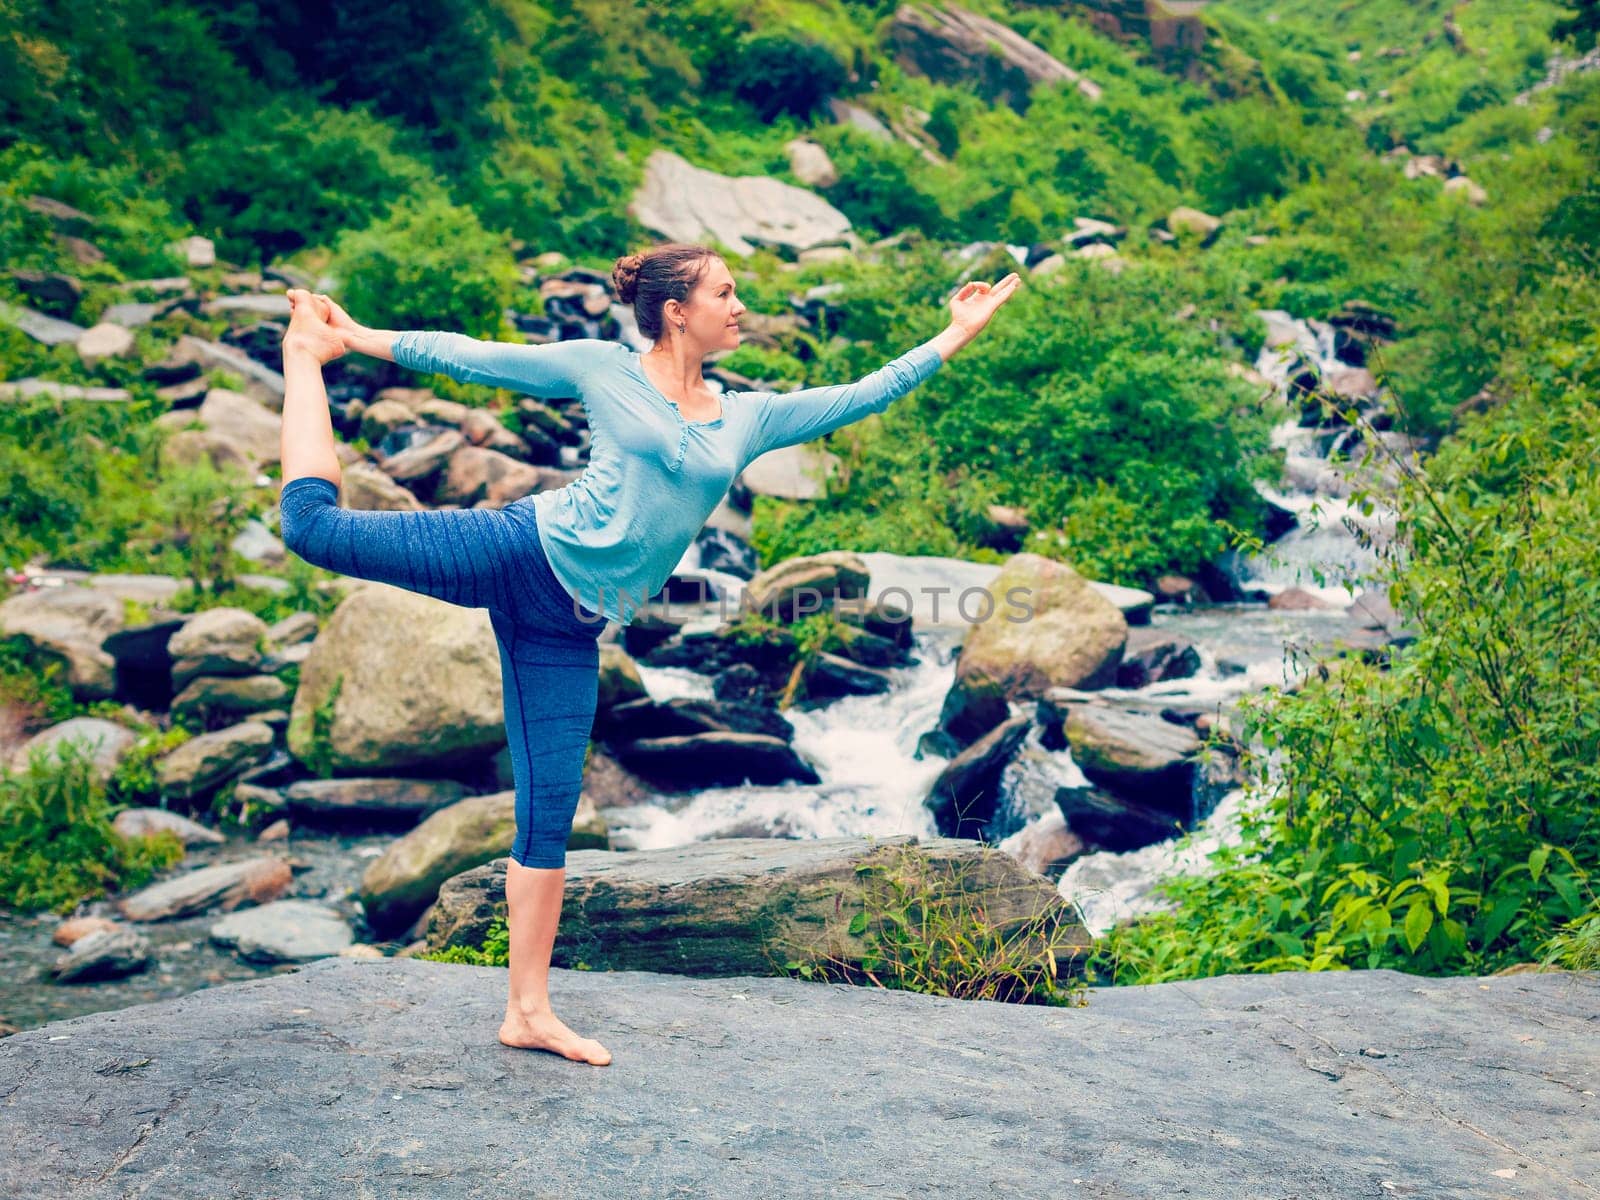 Vintage retro effect hipster style image of woman doing yoga asana Natarajasana - Lord of the dance pose outdoors at waterfall in Himalayas